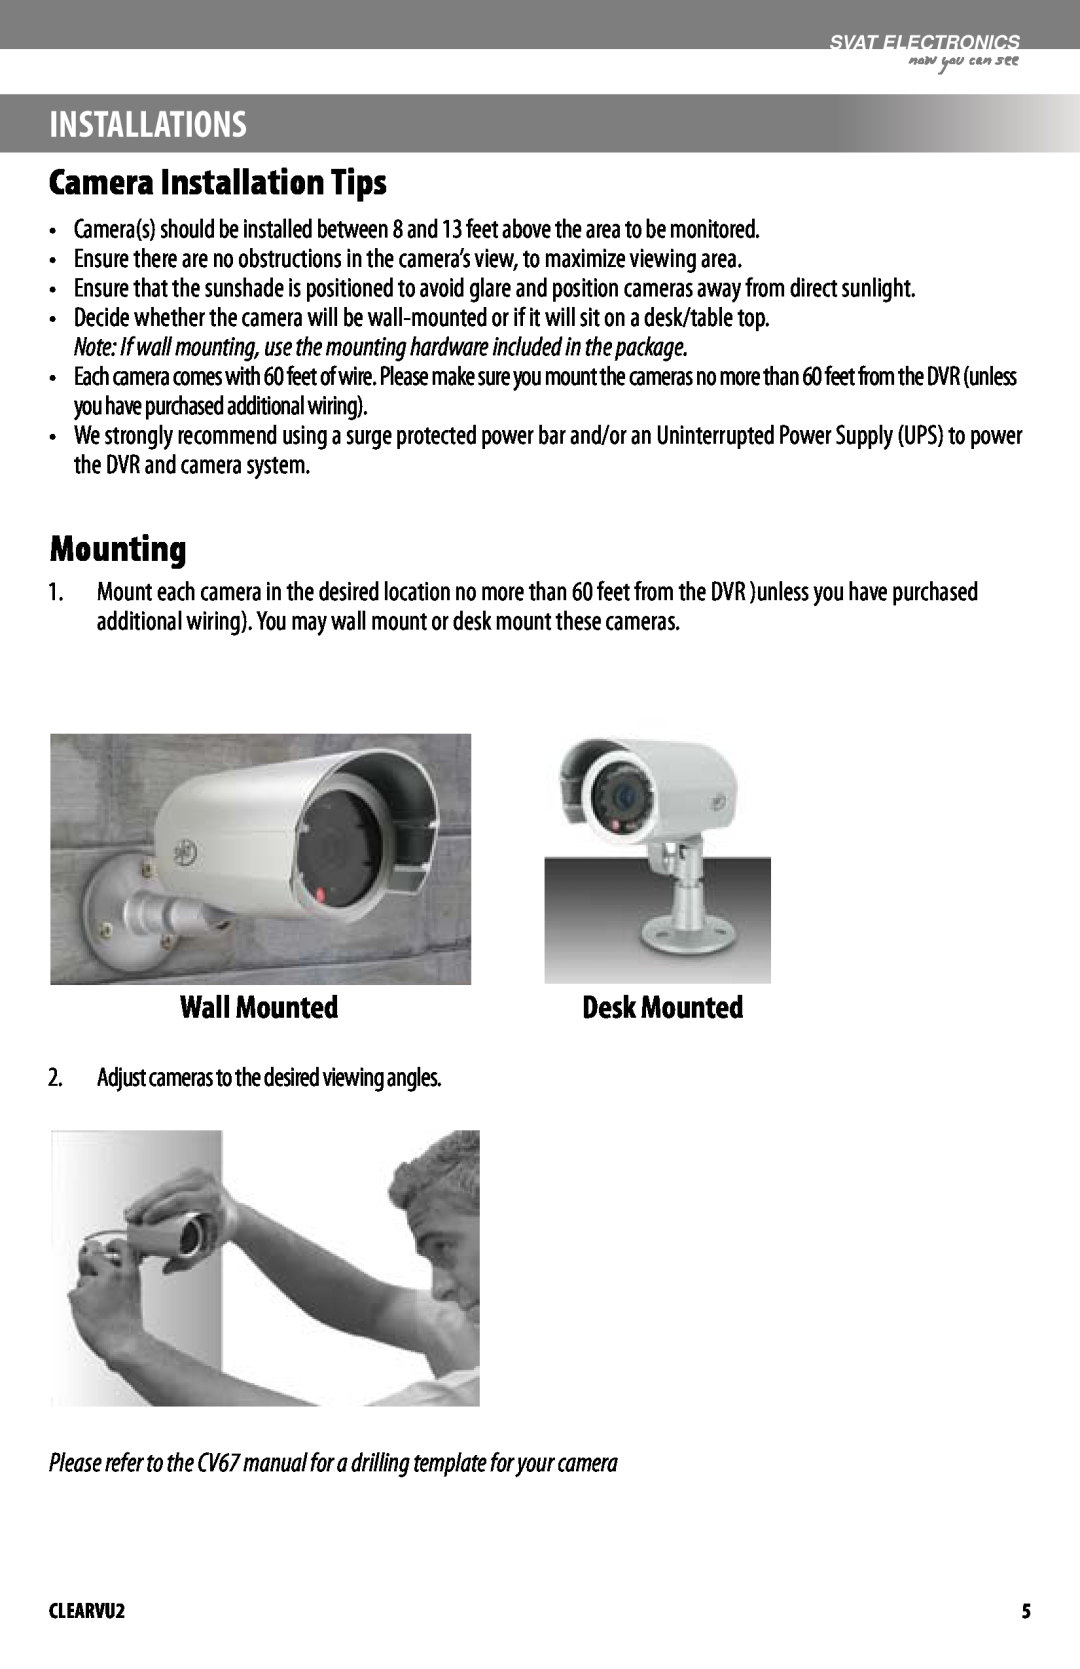 SVAT Electronics CLEARVU2 Installations, Camera Installation Tips, Mounting, Wall Mounted, now you can see 